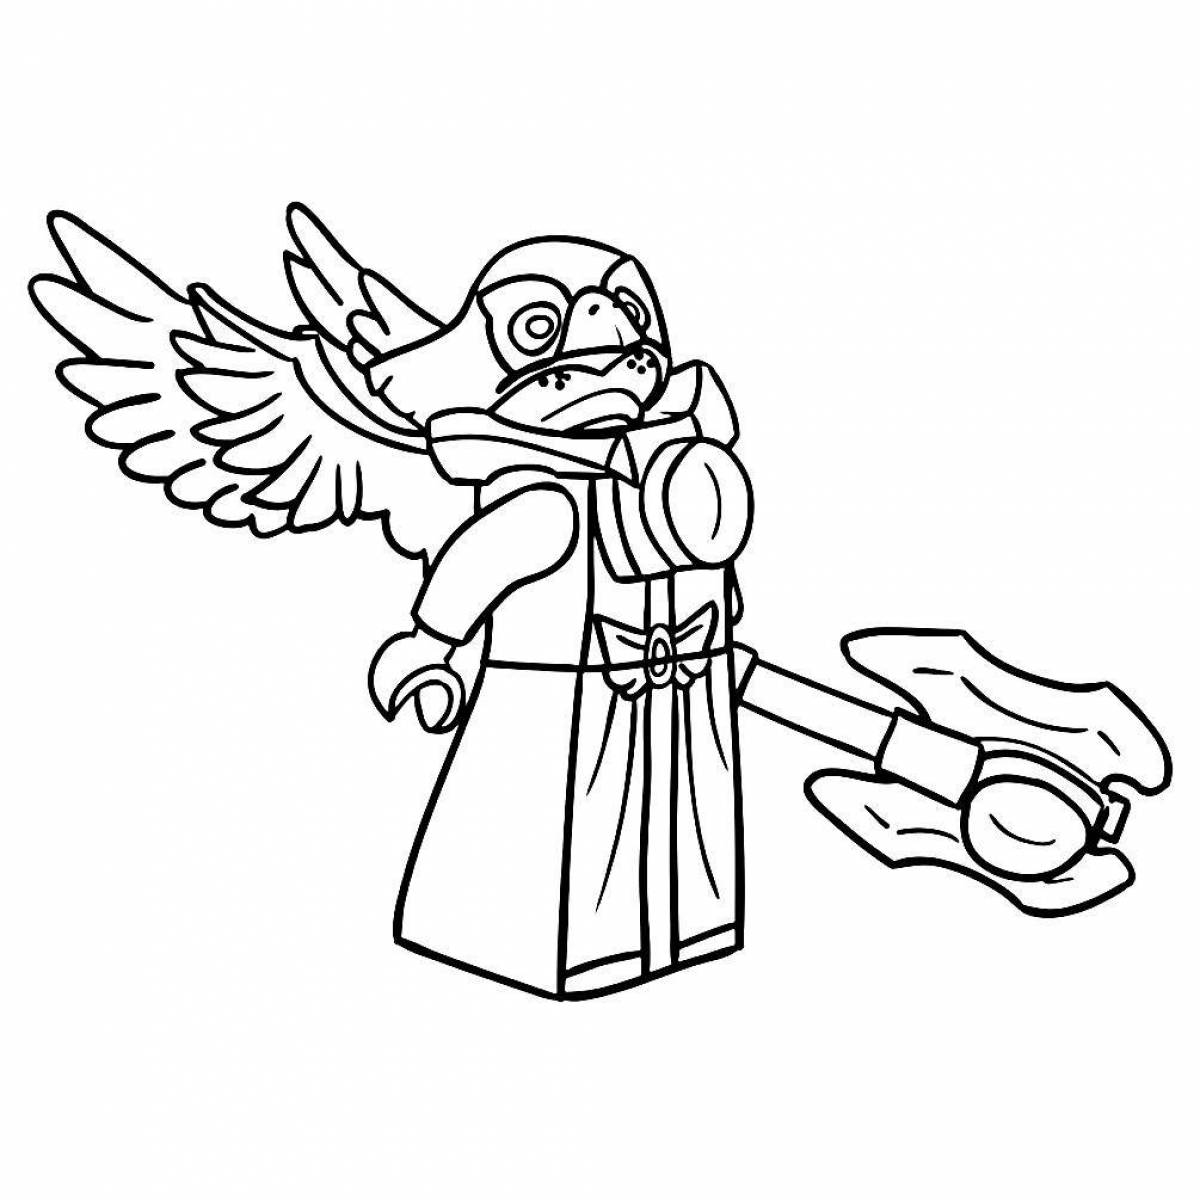 Amazing lego chima coloring page